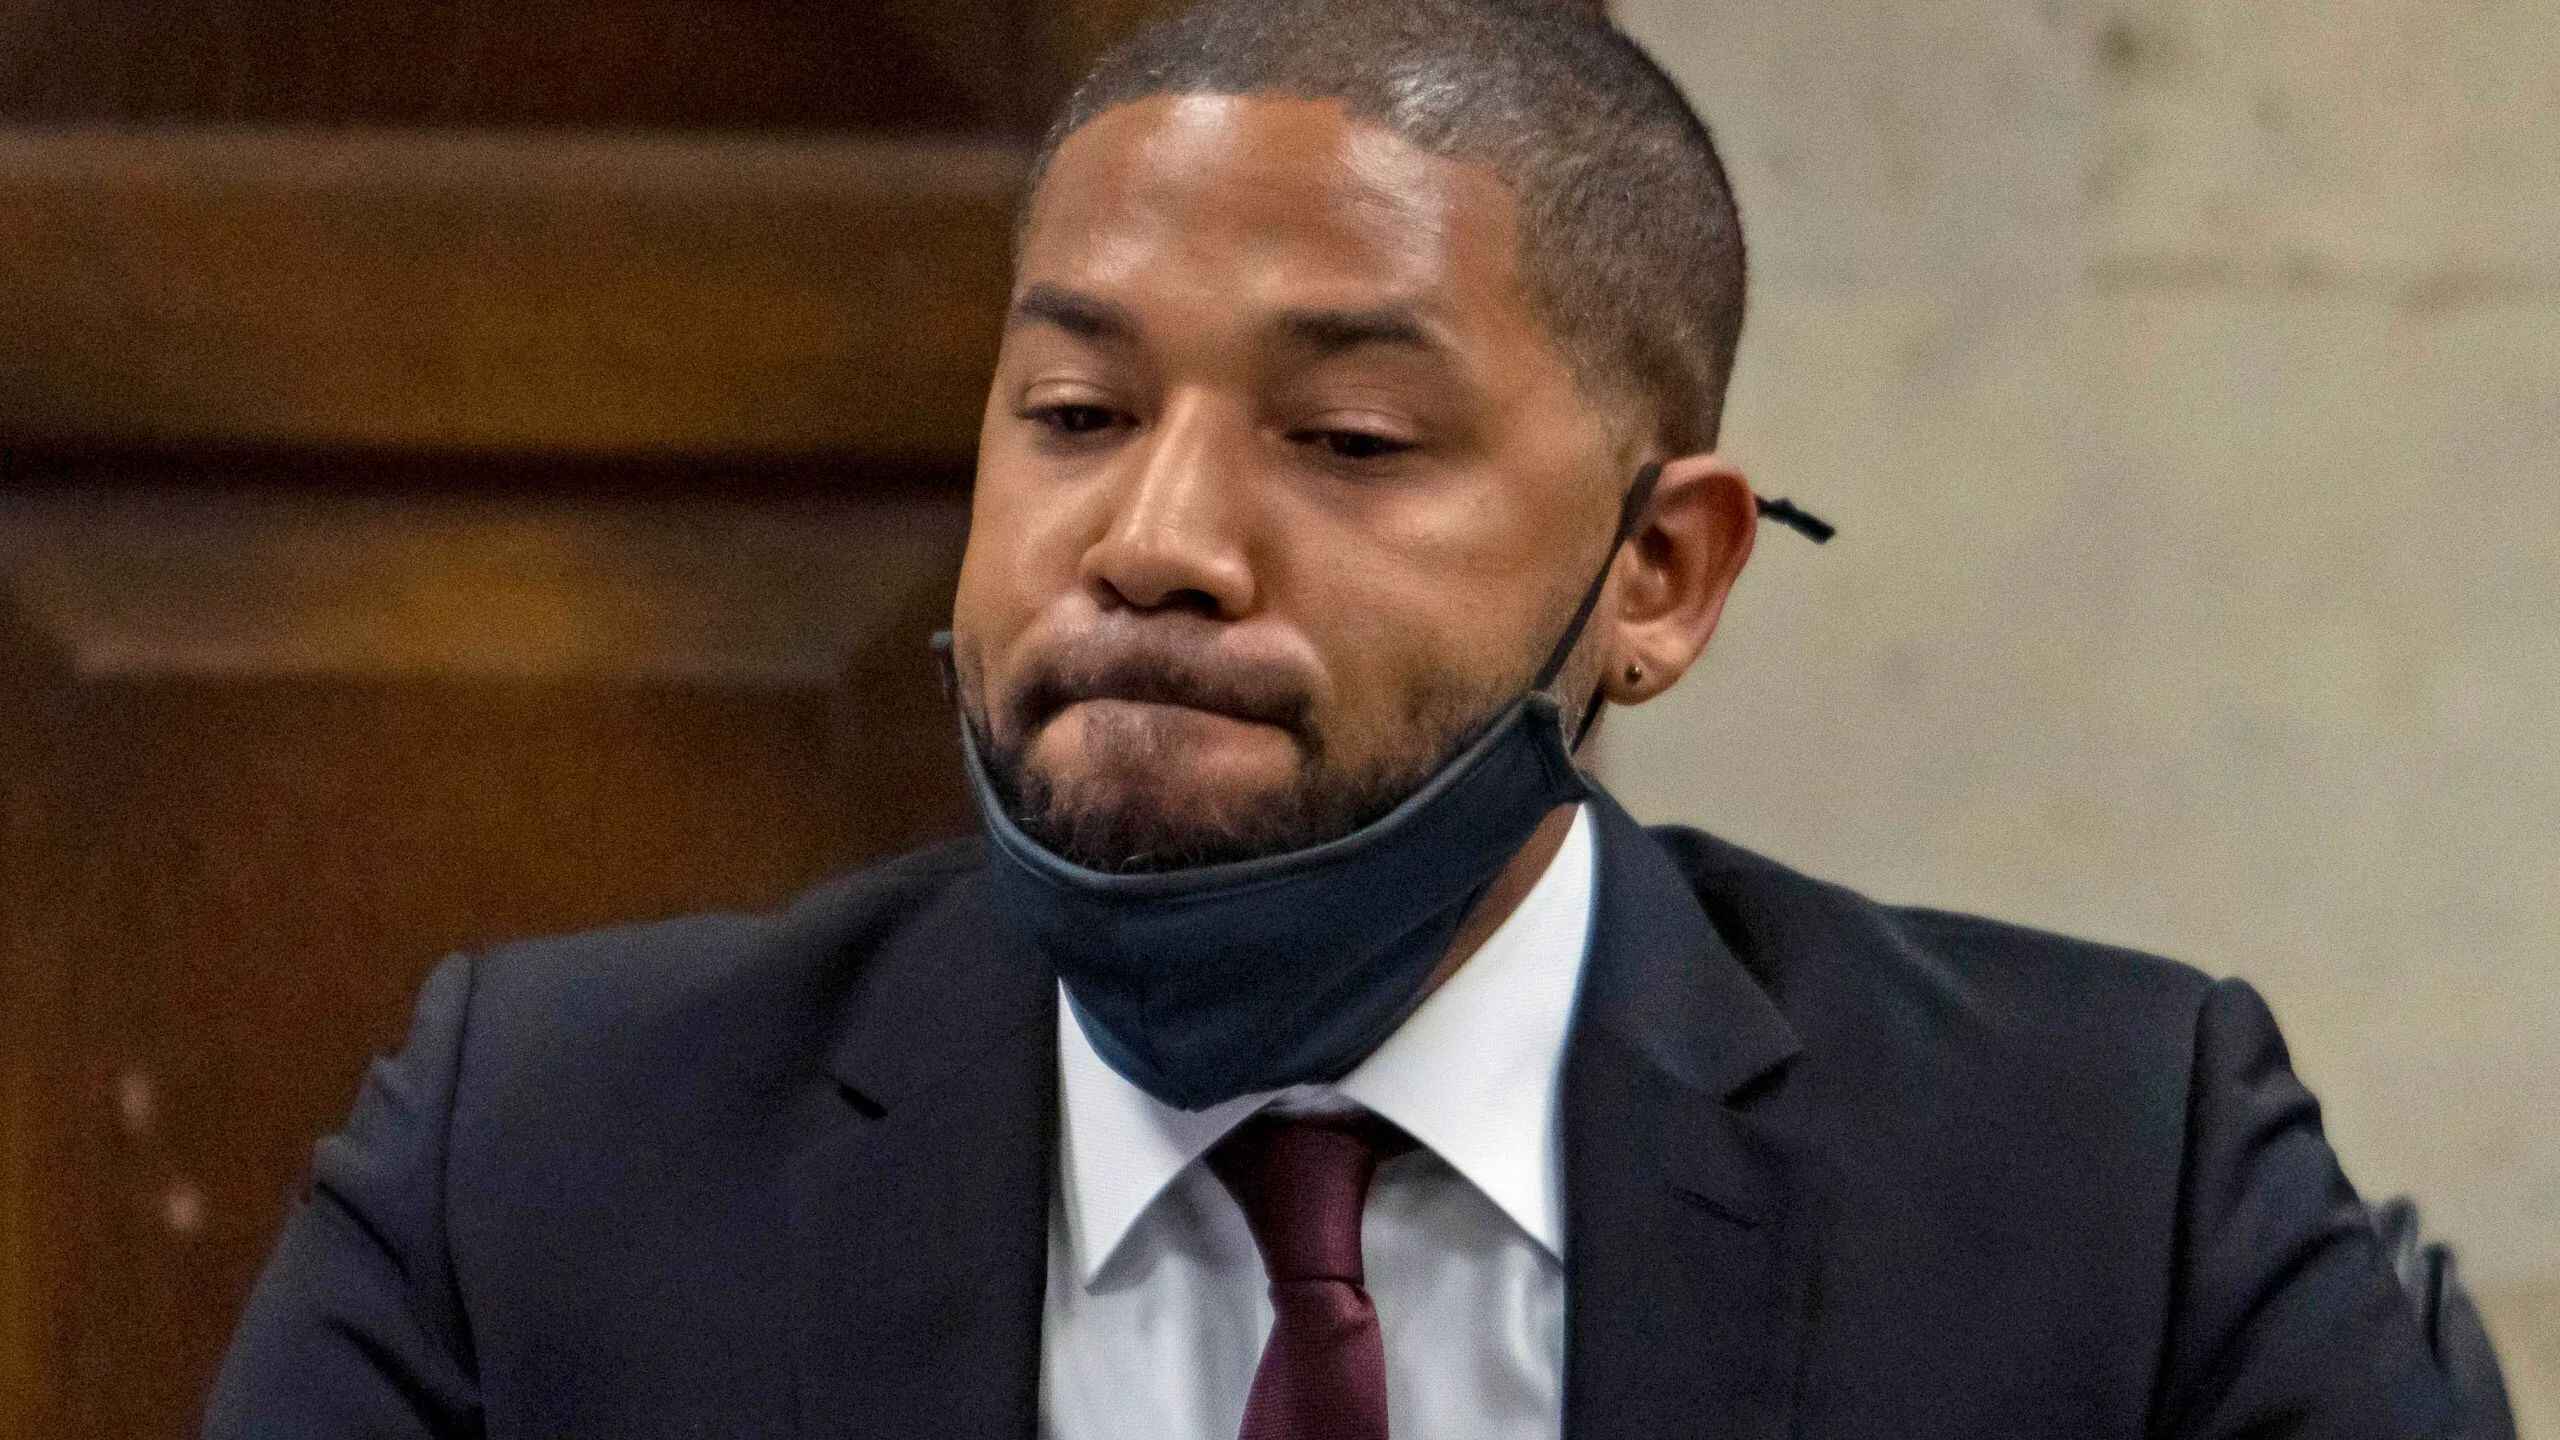 Jussie Smollett’s Conviction Upheld, But Jail Time Delayed